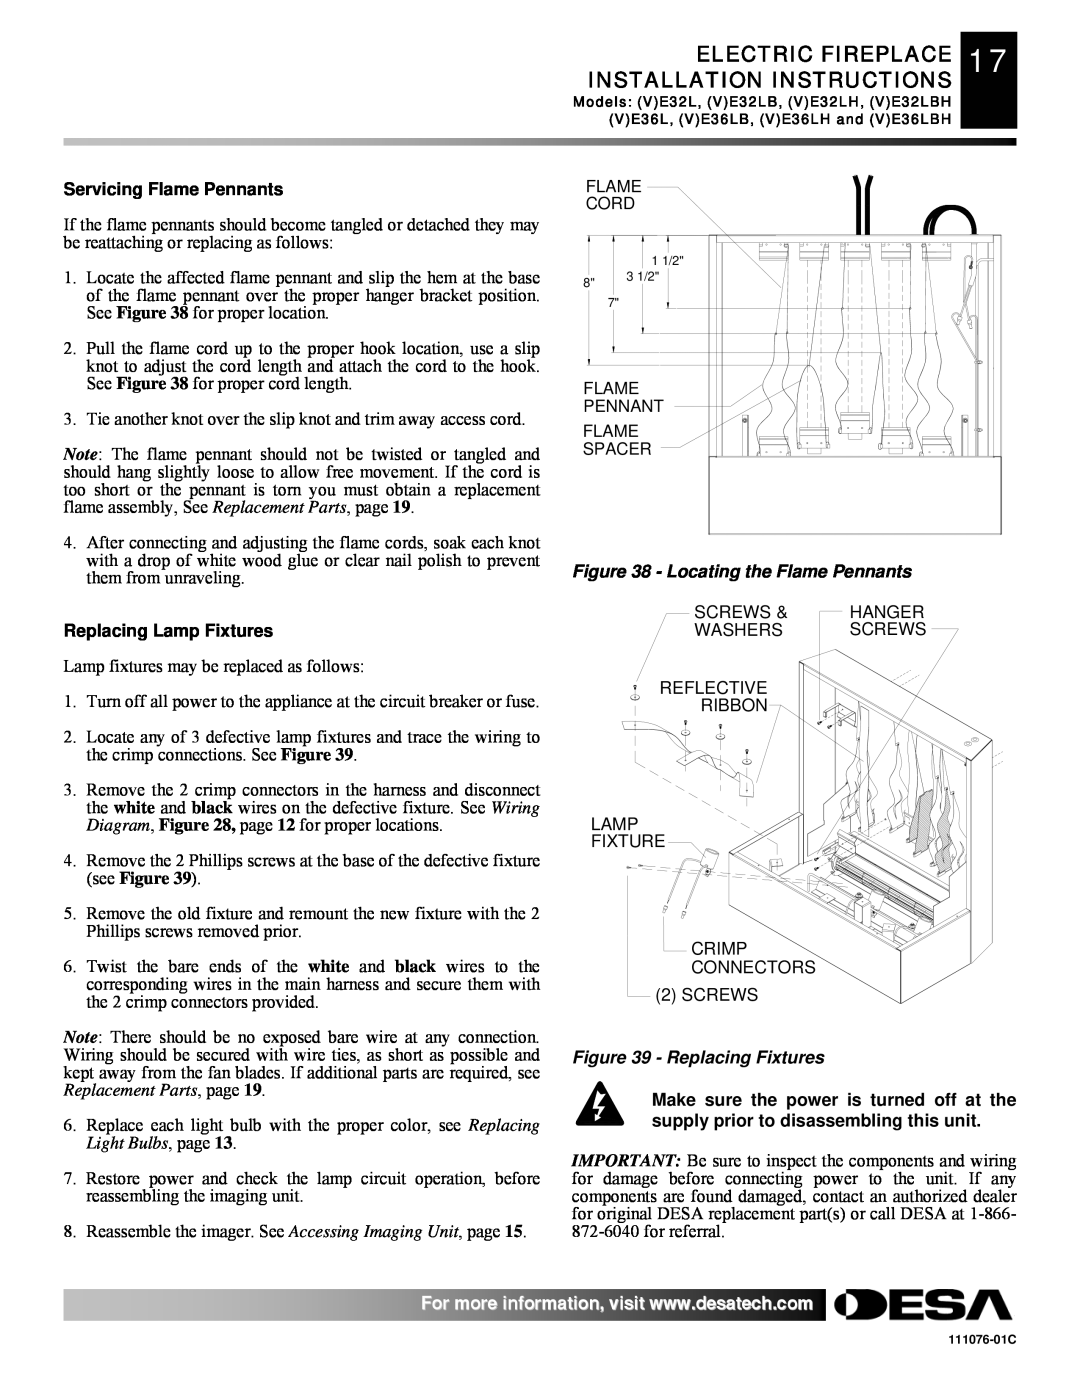 Desa E36(L)(B)(H) ELECTRIC FIREPLACE 17 INSTALLATION INSTRUCTIONS, Servicing Flame Pennants, Replacing Lamp Fixtures 